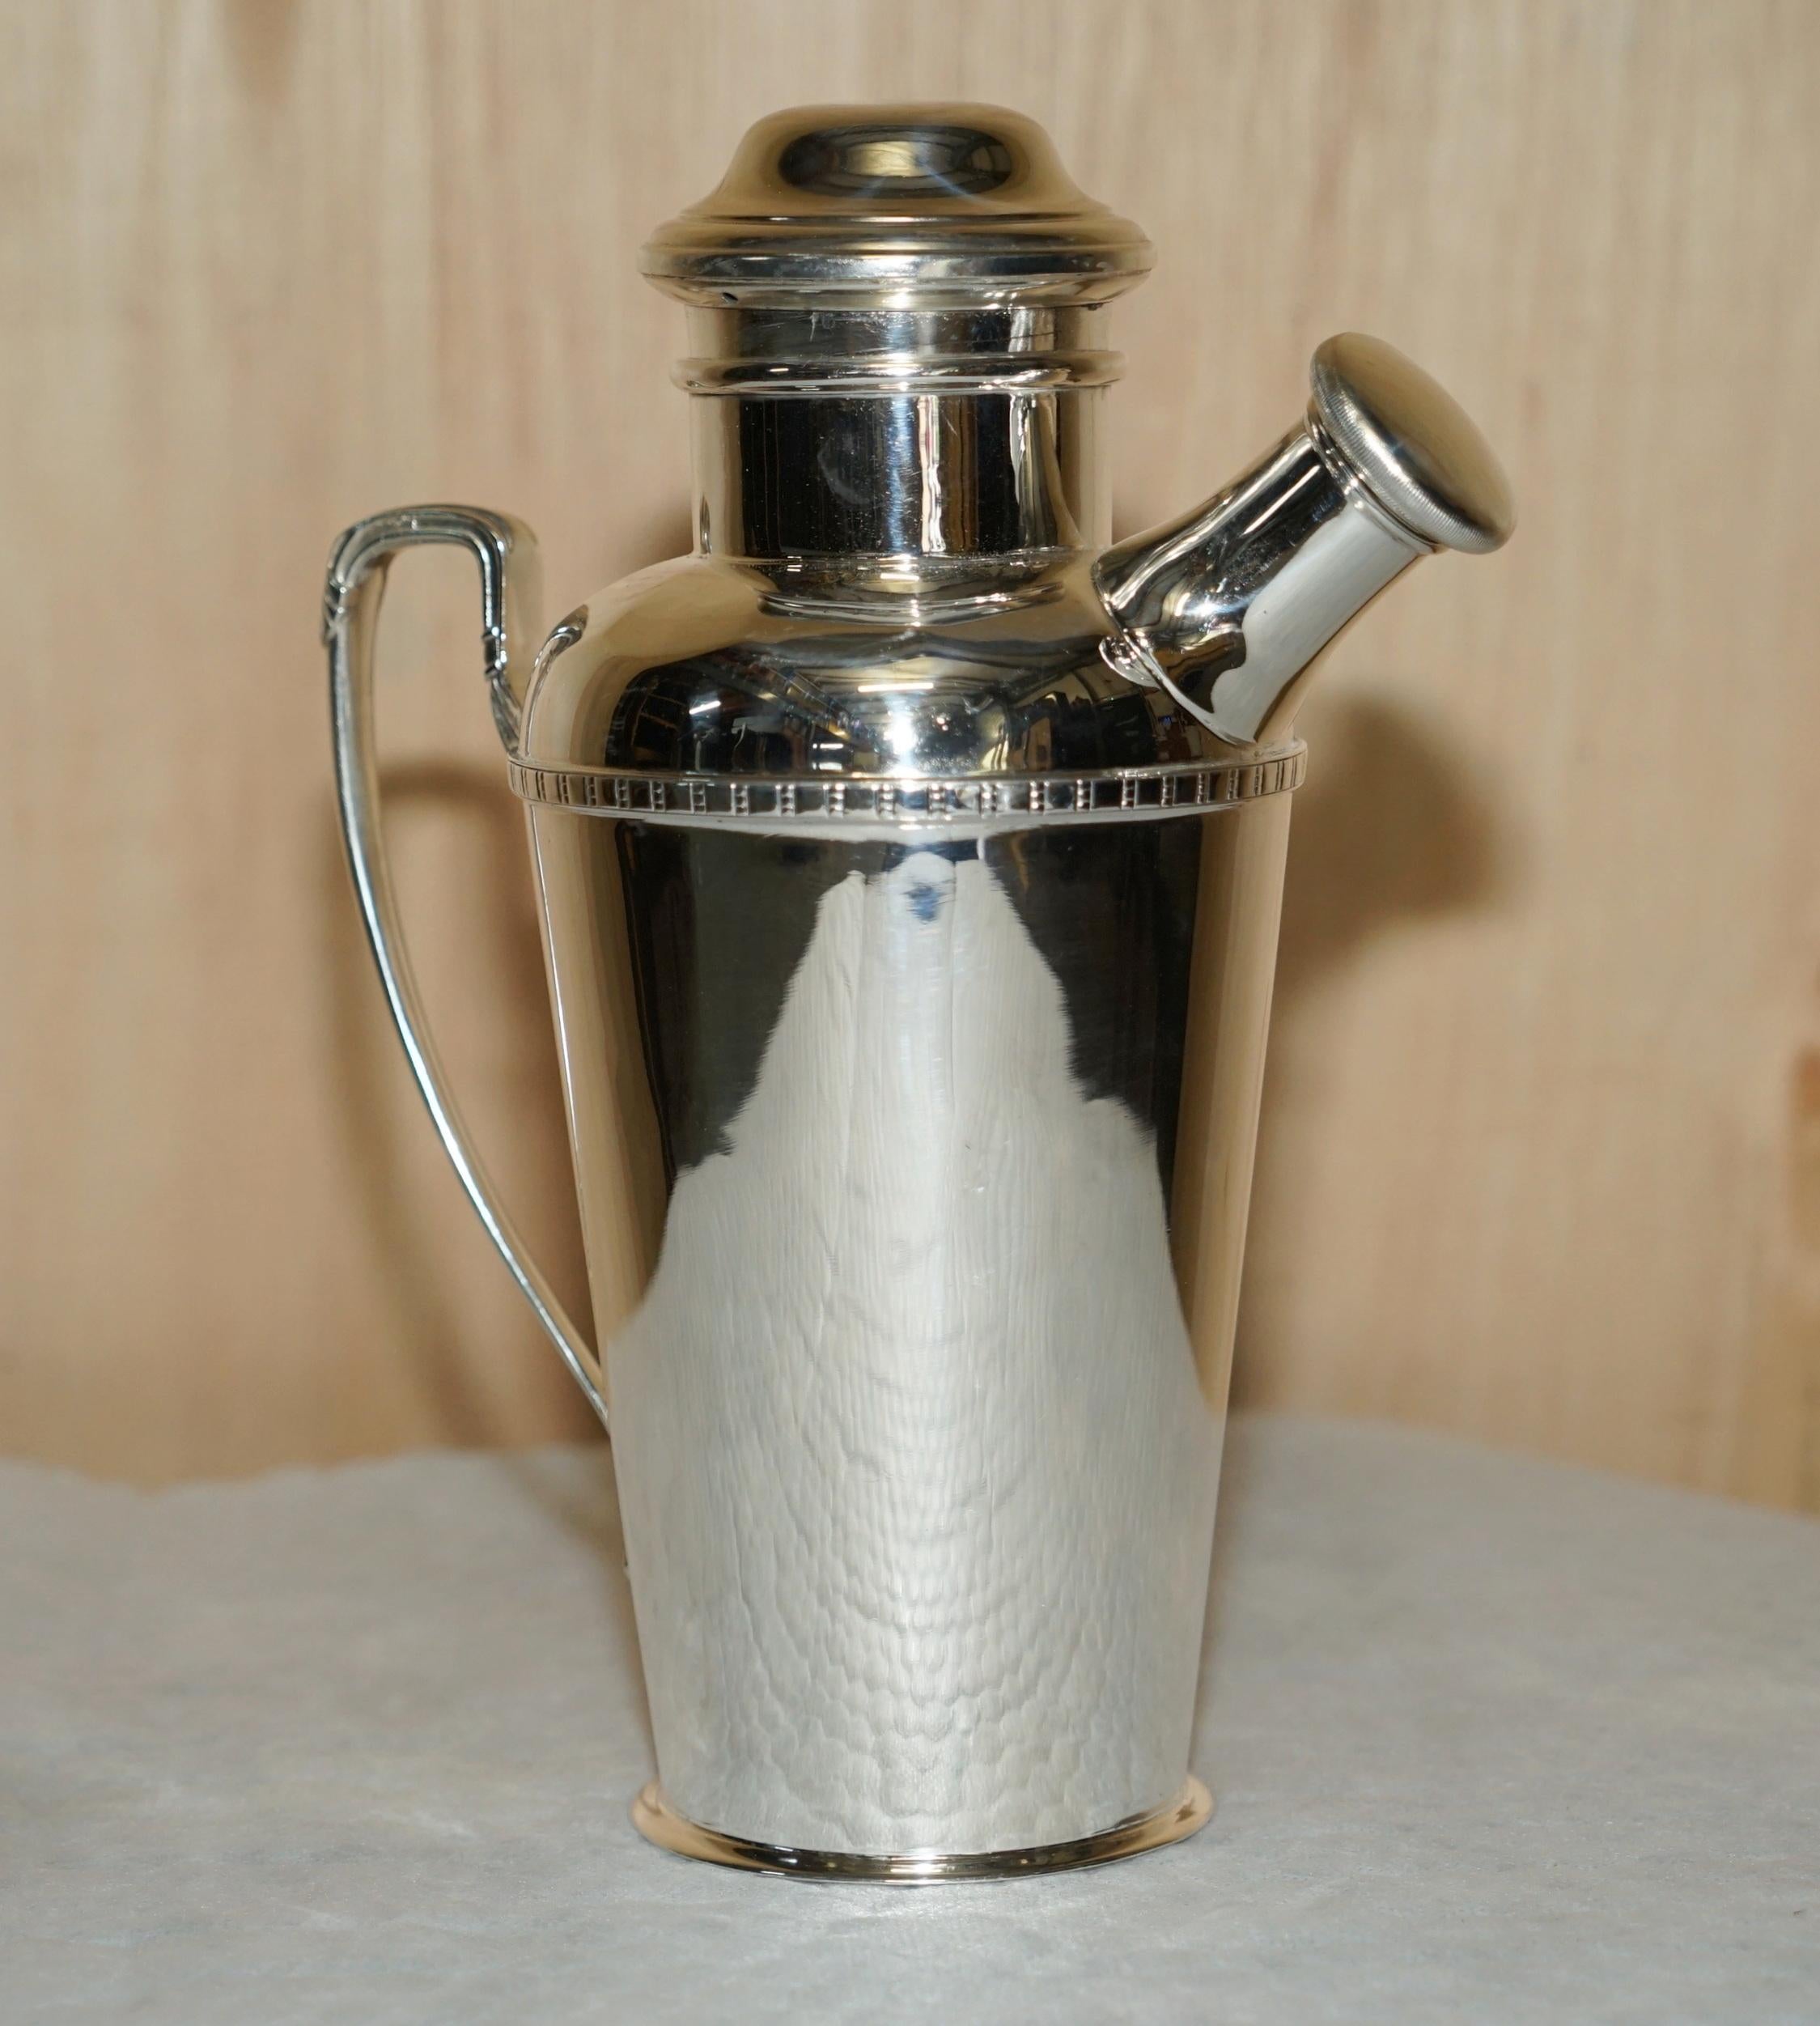 We are delighted to offer for sale this stunning, circa 1920 Art Deco Asprey & Co London EPNS cocktail shaker

A good looking and well made piece, these were made for the London elite in the swinging 1920's who were all things bling and sparkly